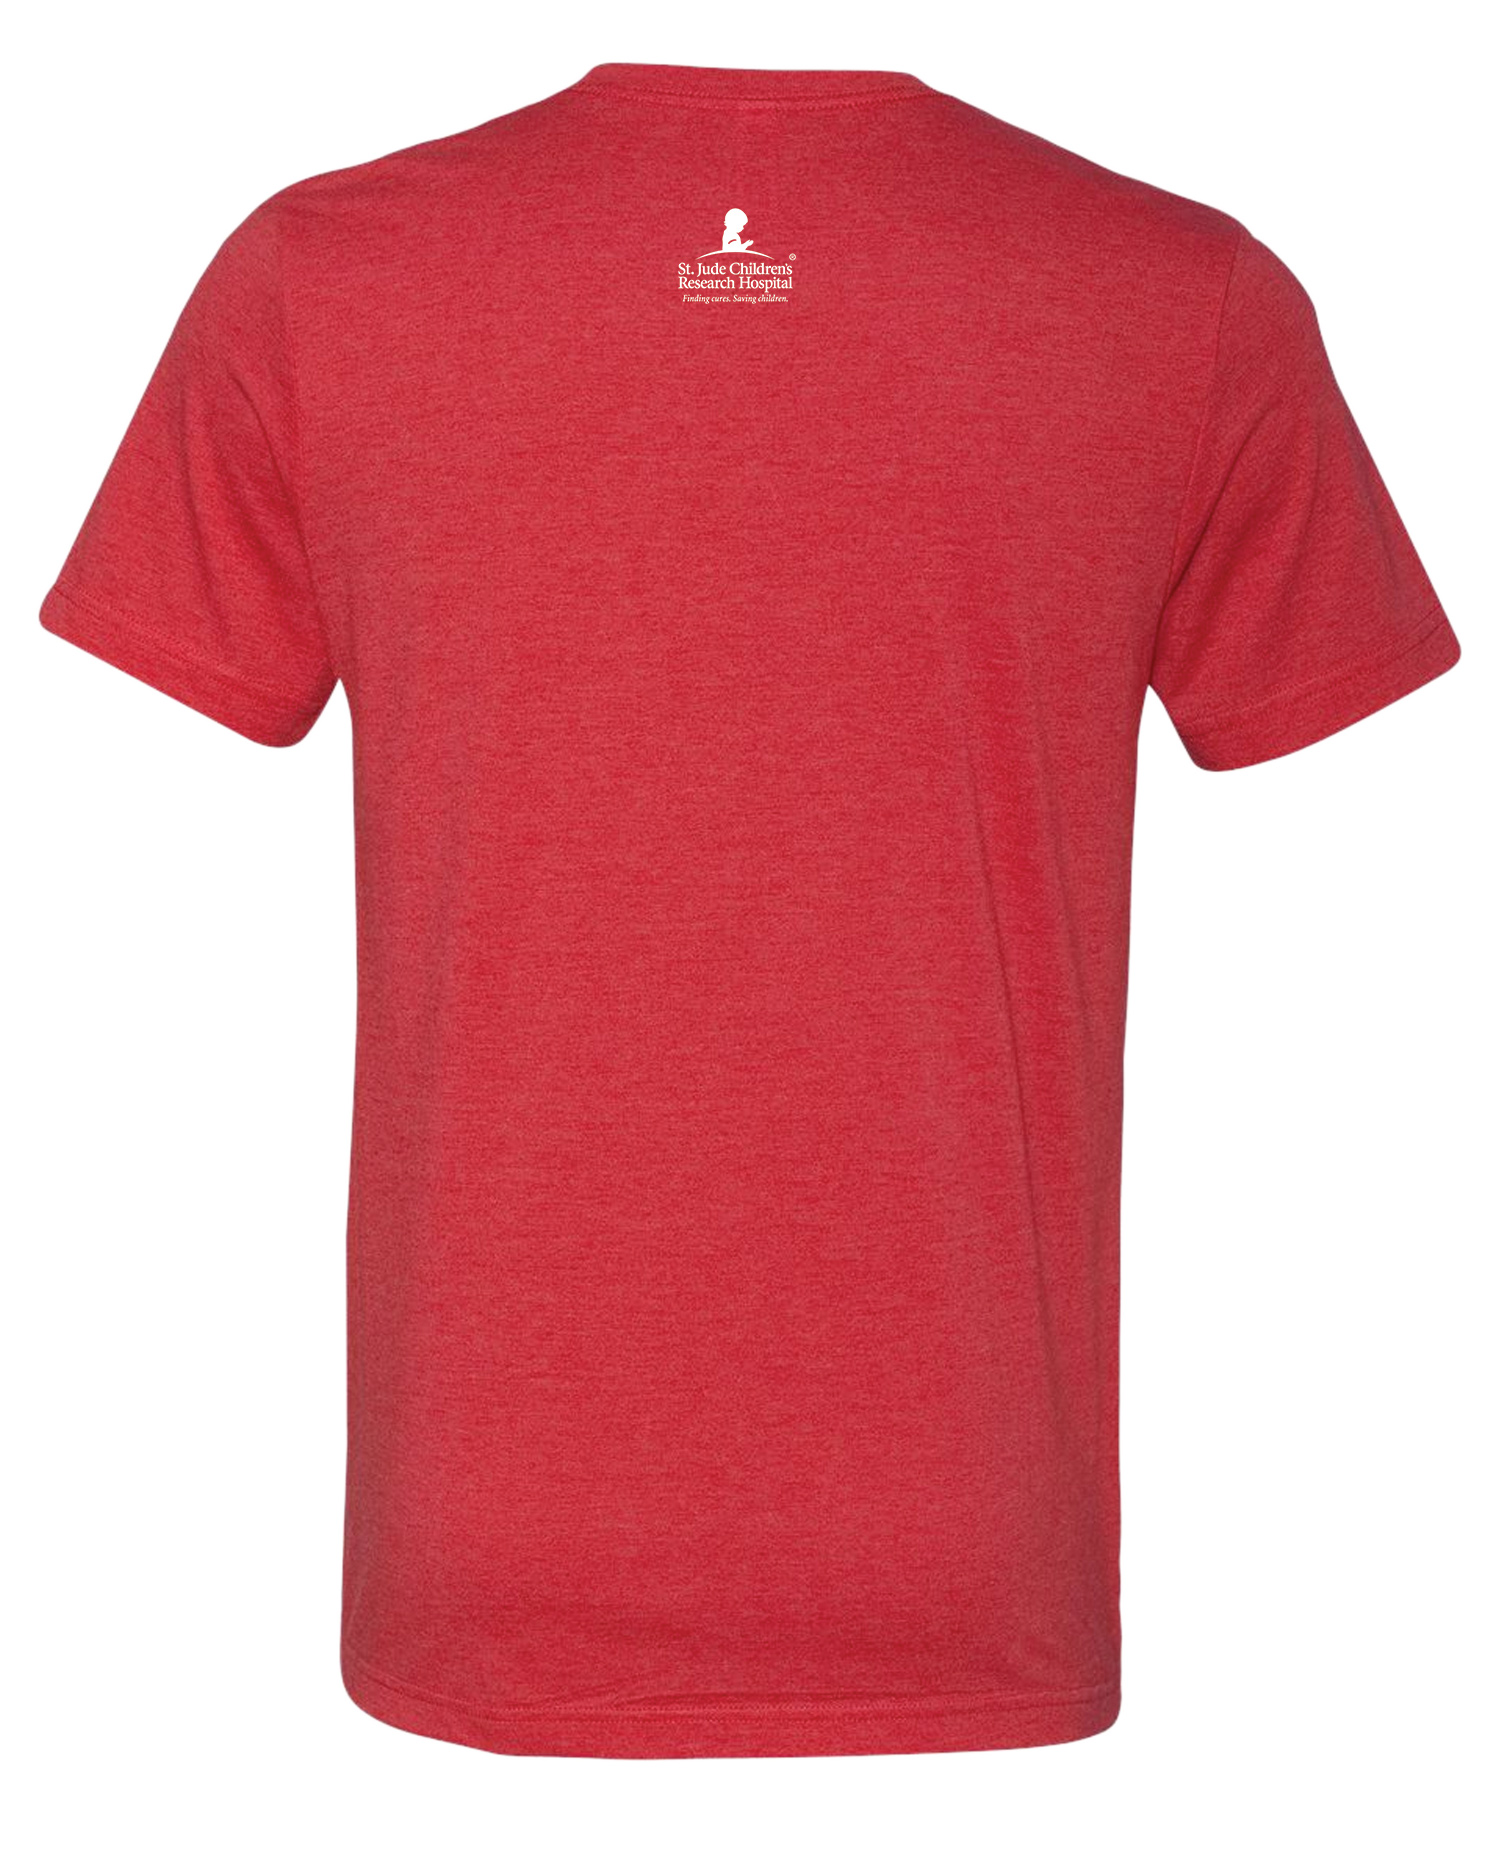 Unisex Proud Supporter T-Shirt - Red